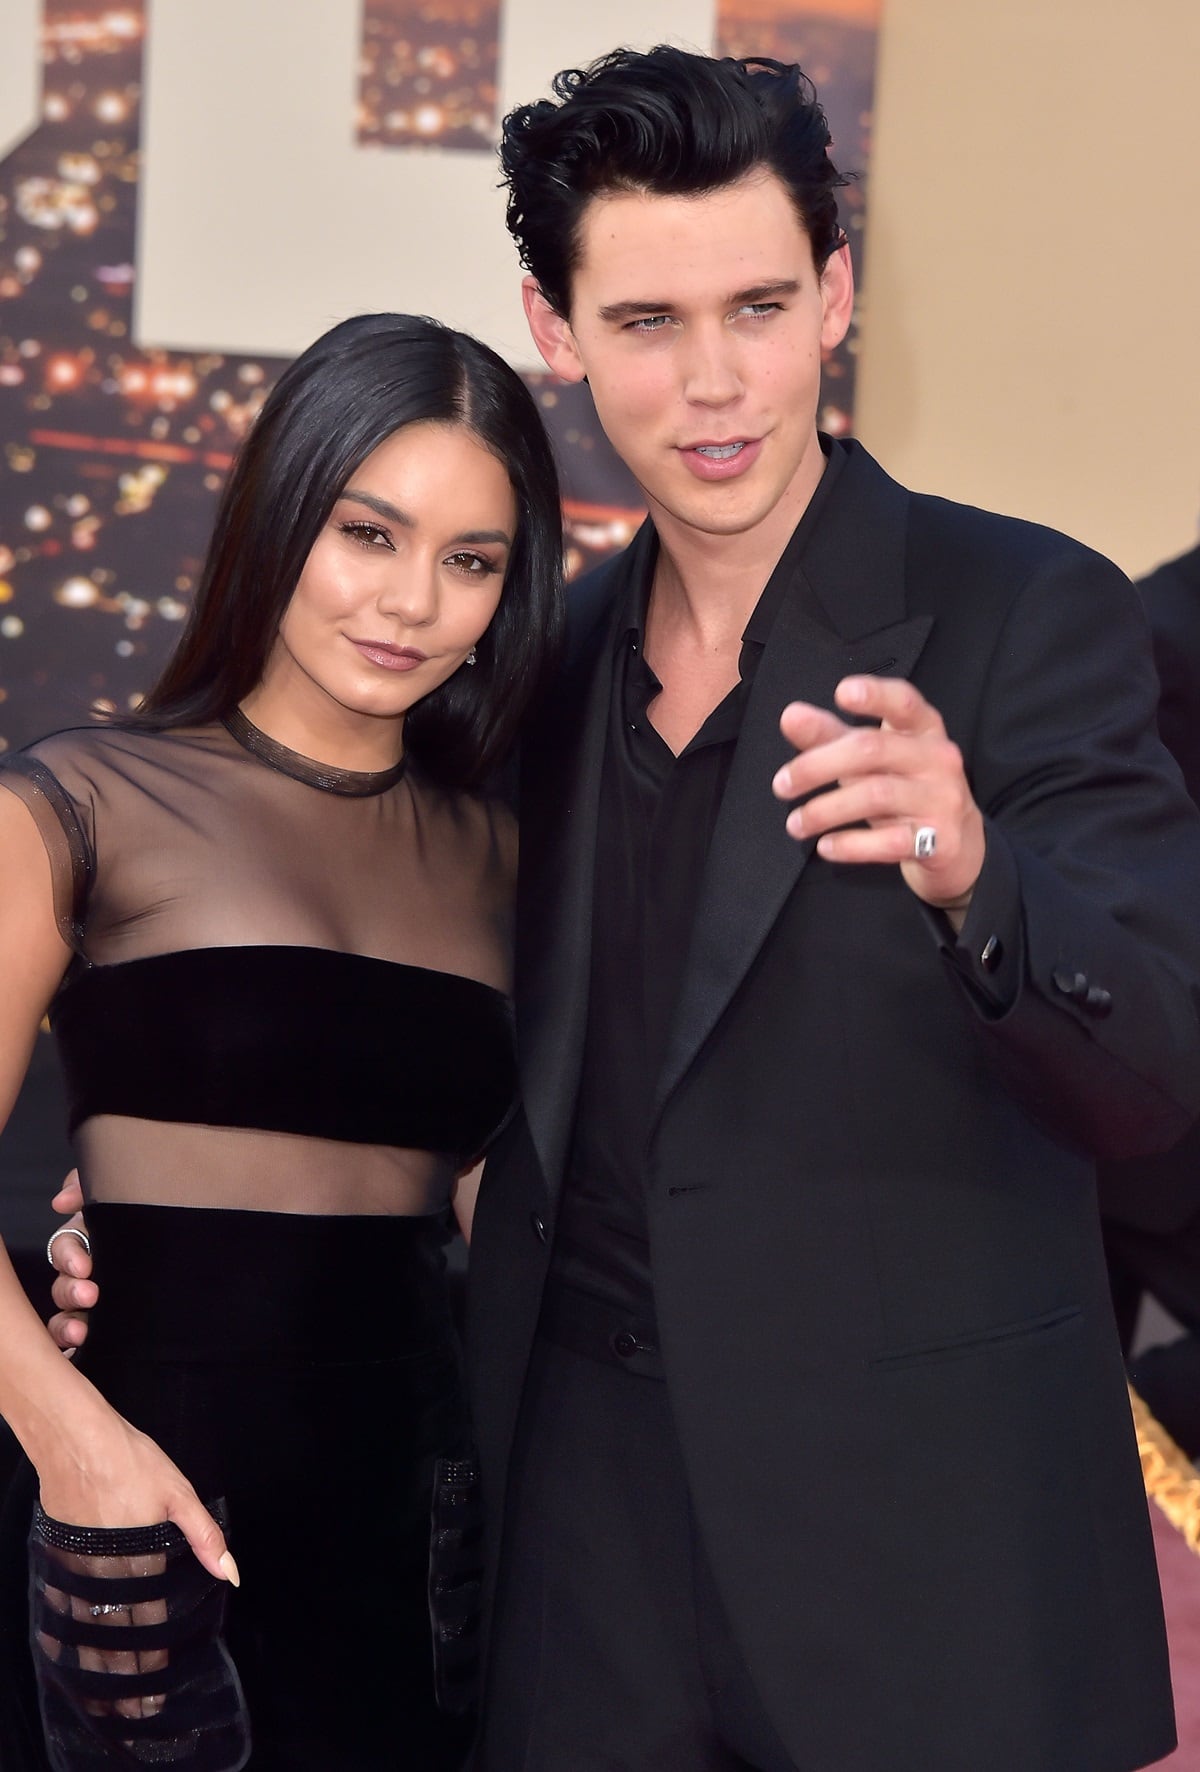 At the Los Angeles premiere of 'Once Upon A Time In Hollywood' on July 22, 2019, Vanessa Anne Hudgens, standing at 5ft 1 (154.9 cm), was 11 inches shorter than Austin Butler, who towers at 6ft 0 (182.9 cm)